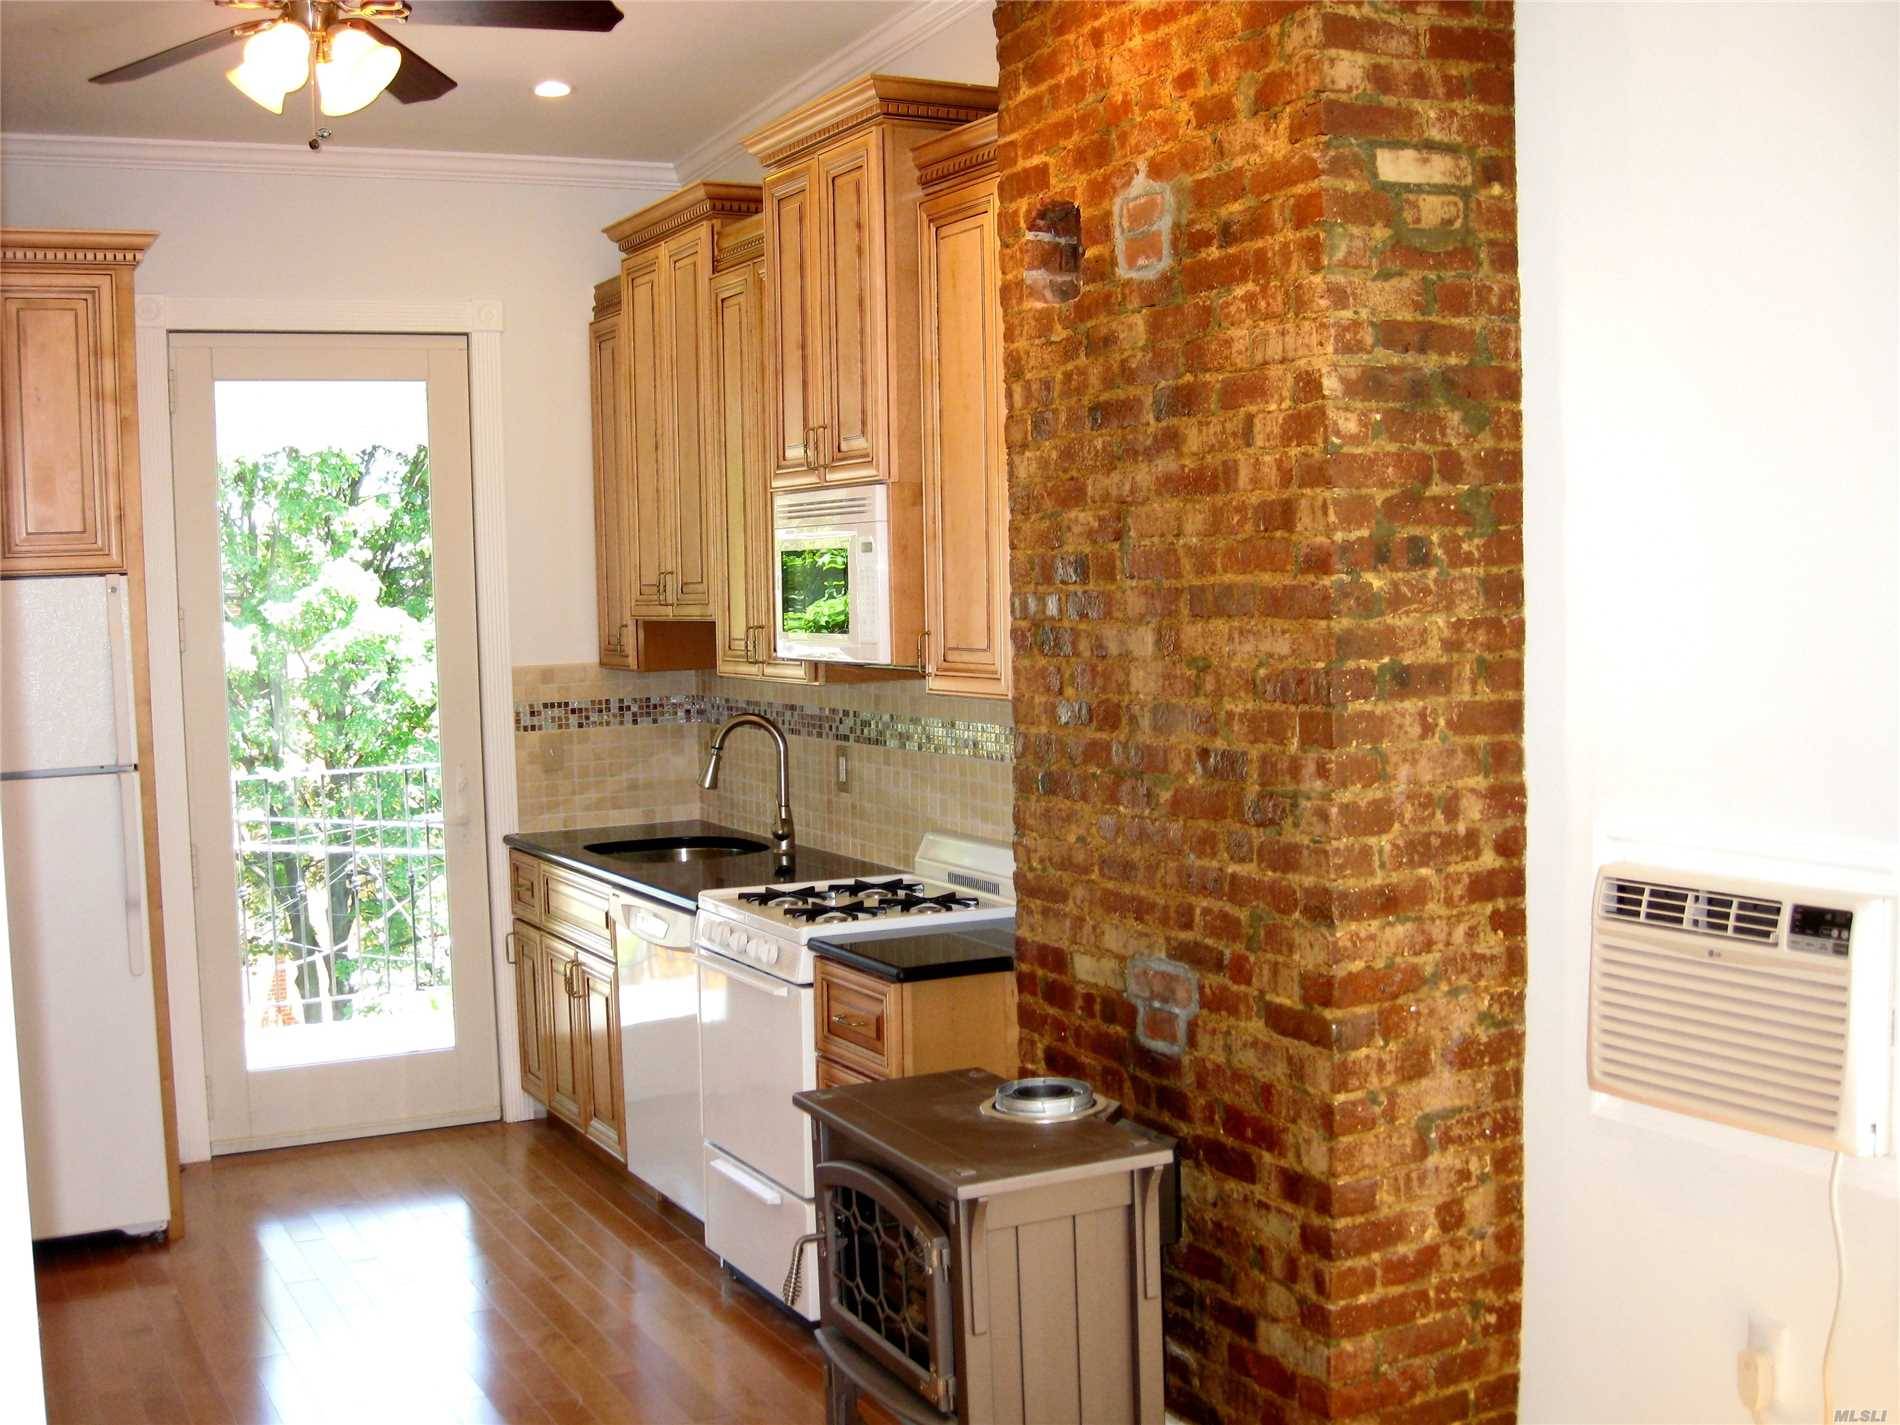 Updated 2 Bedroom Two Bath Apartment With Laundry And Terrace With Back Yard Access.